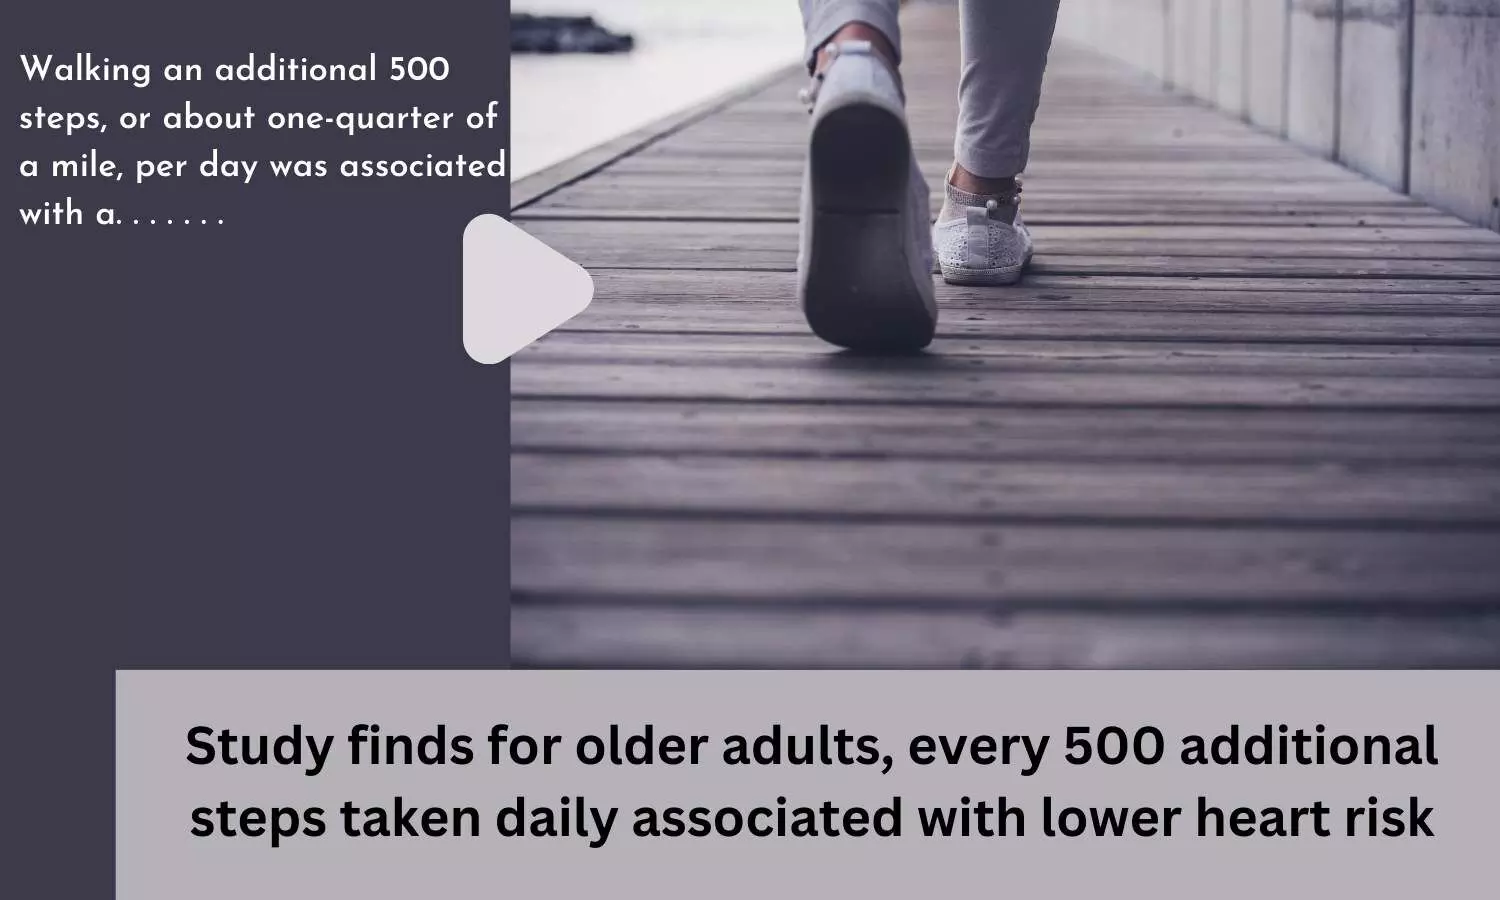 Study finds for older adults, every 500 additional steps taken daily associated with lower heart risk